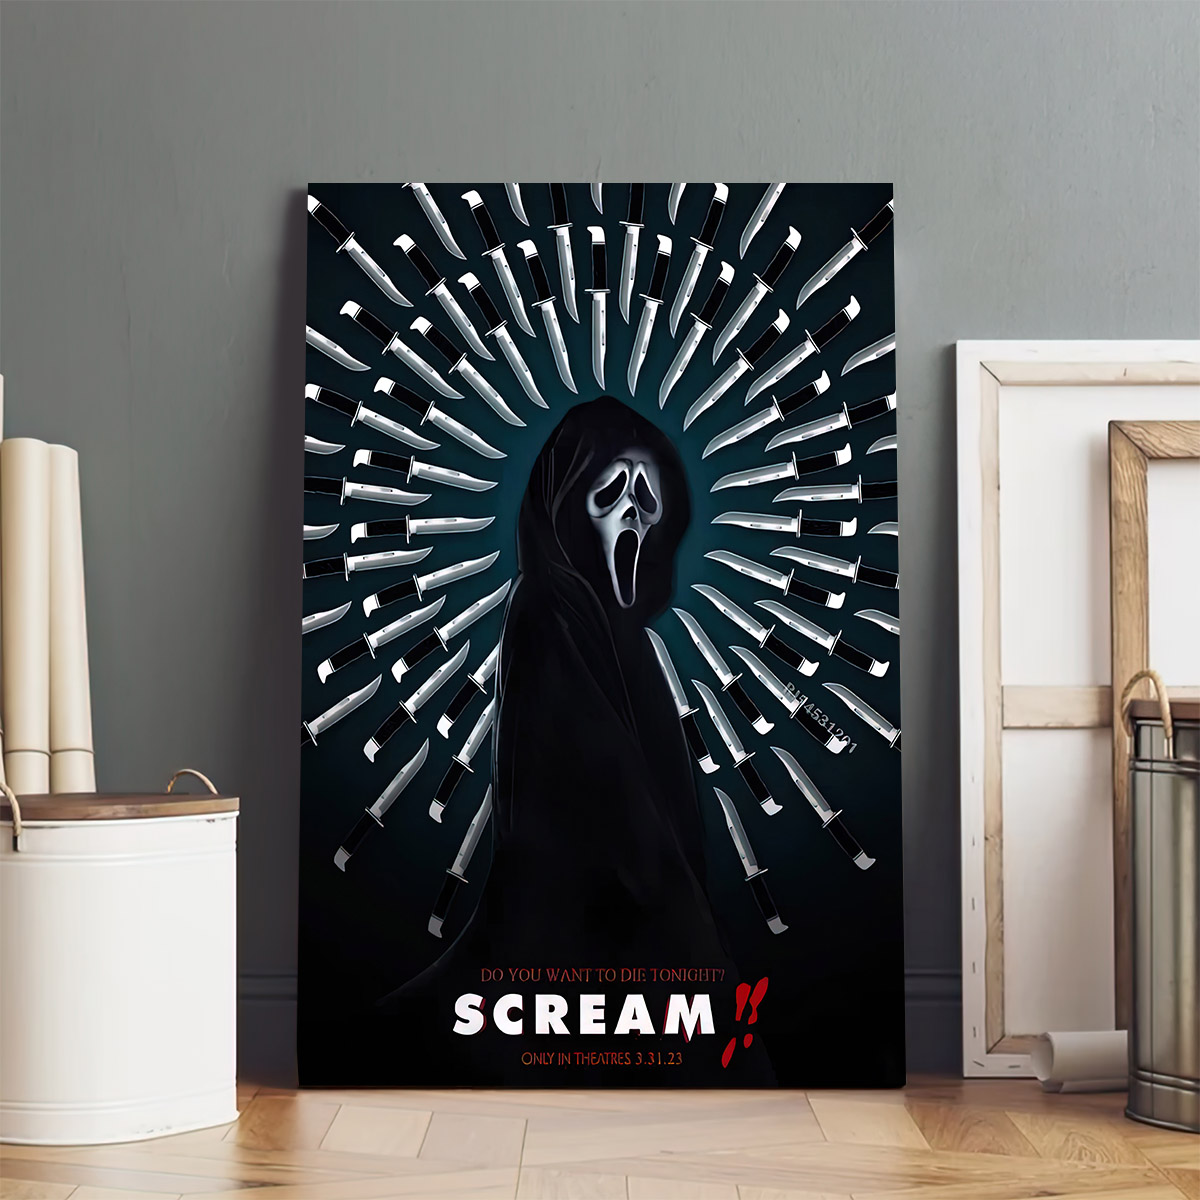 Scream VI Do You Want To Die Tonight Poster Canvas Lbinor